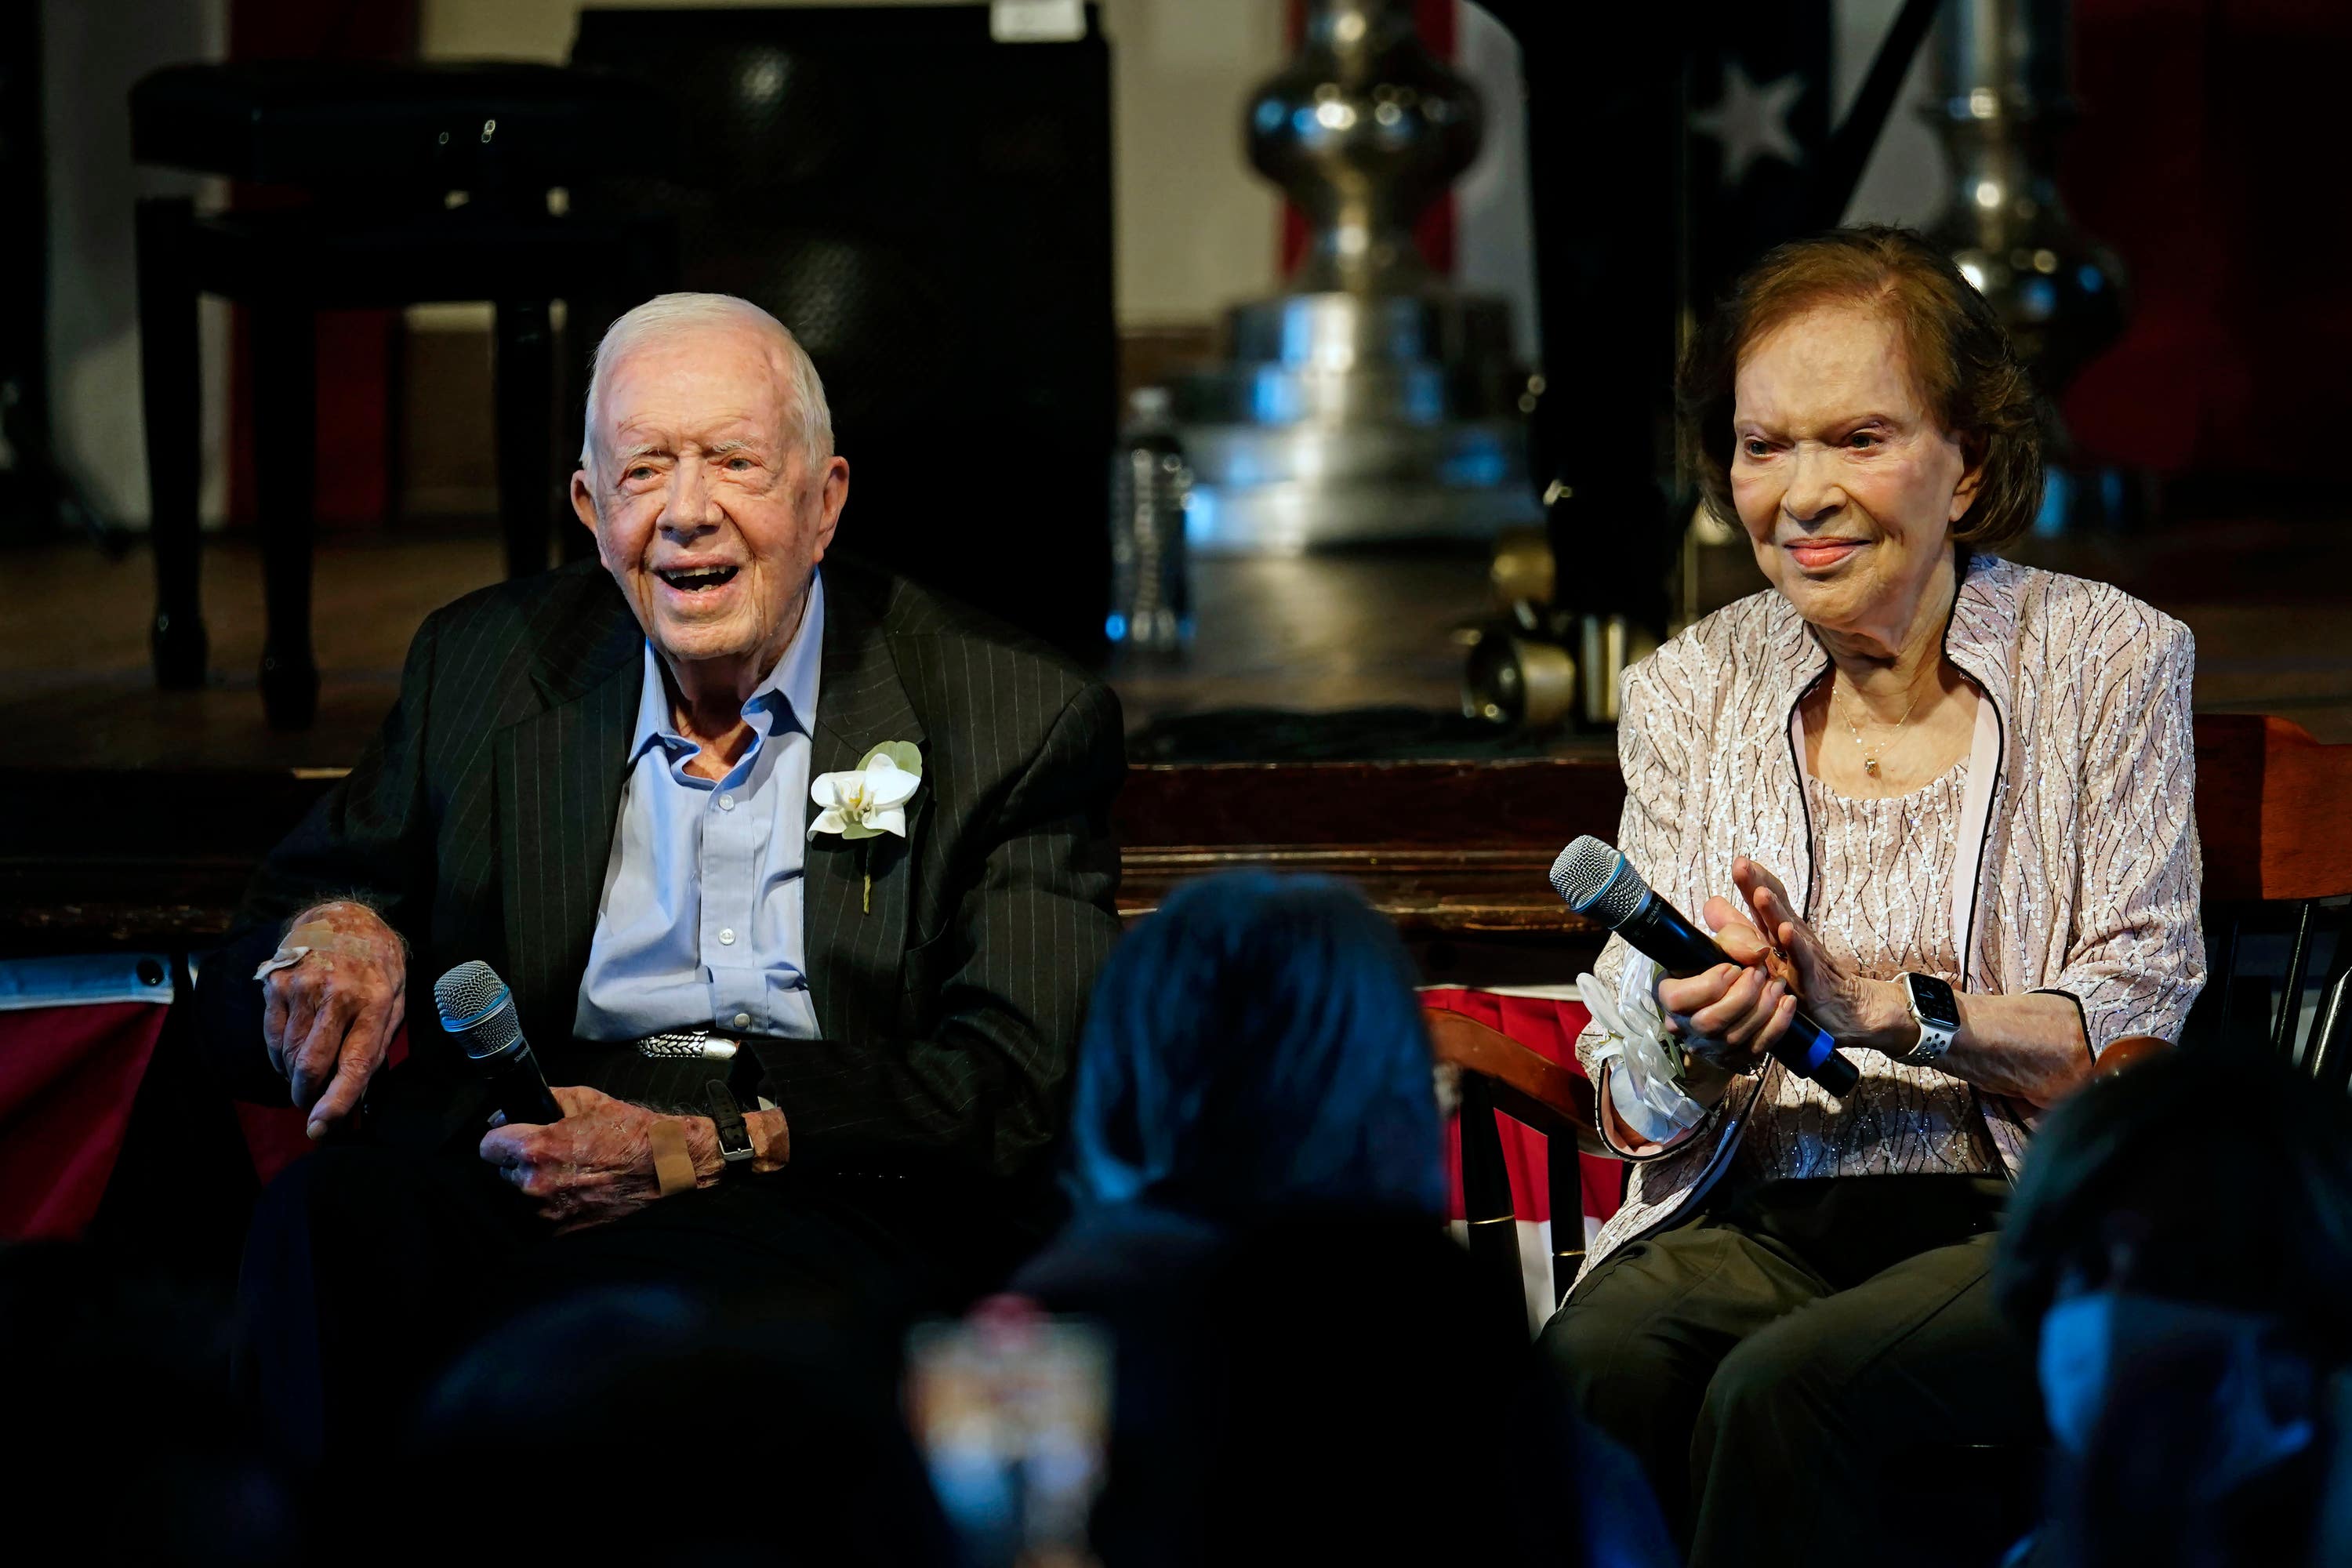 Former US president Jimmy Carter and his wife, former first lady Rosalynn, celebrate their 75th wedding anniversary.